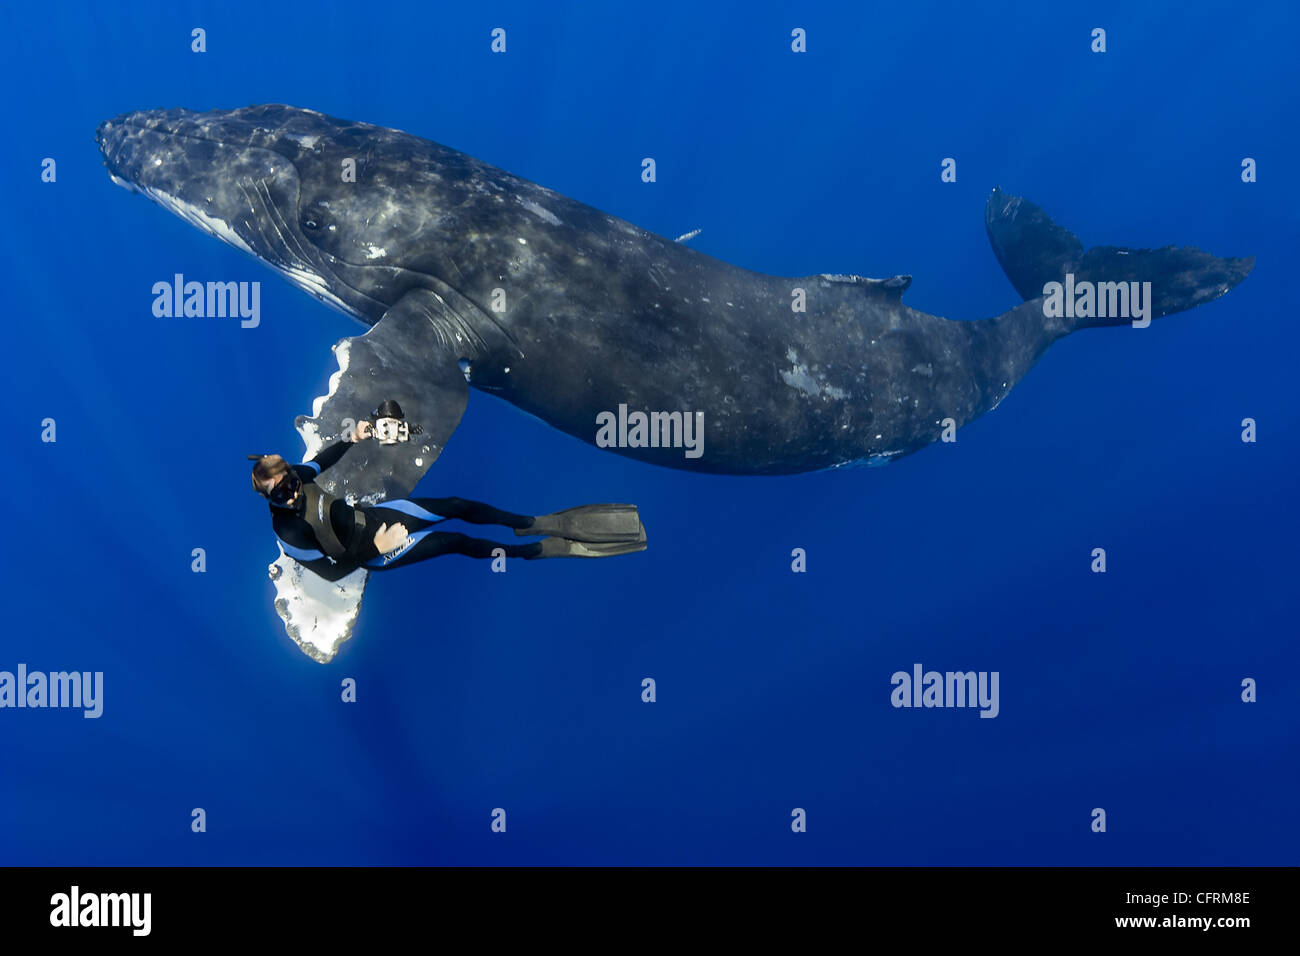 humpback whale, Megaptera novaeangliae, and diver, Pacific Ocean Stock Photo